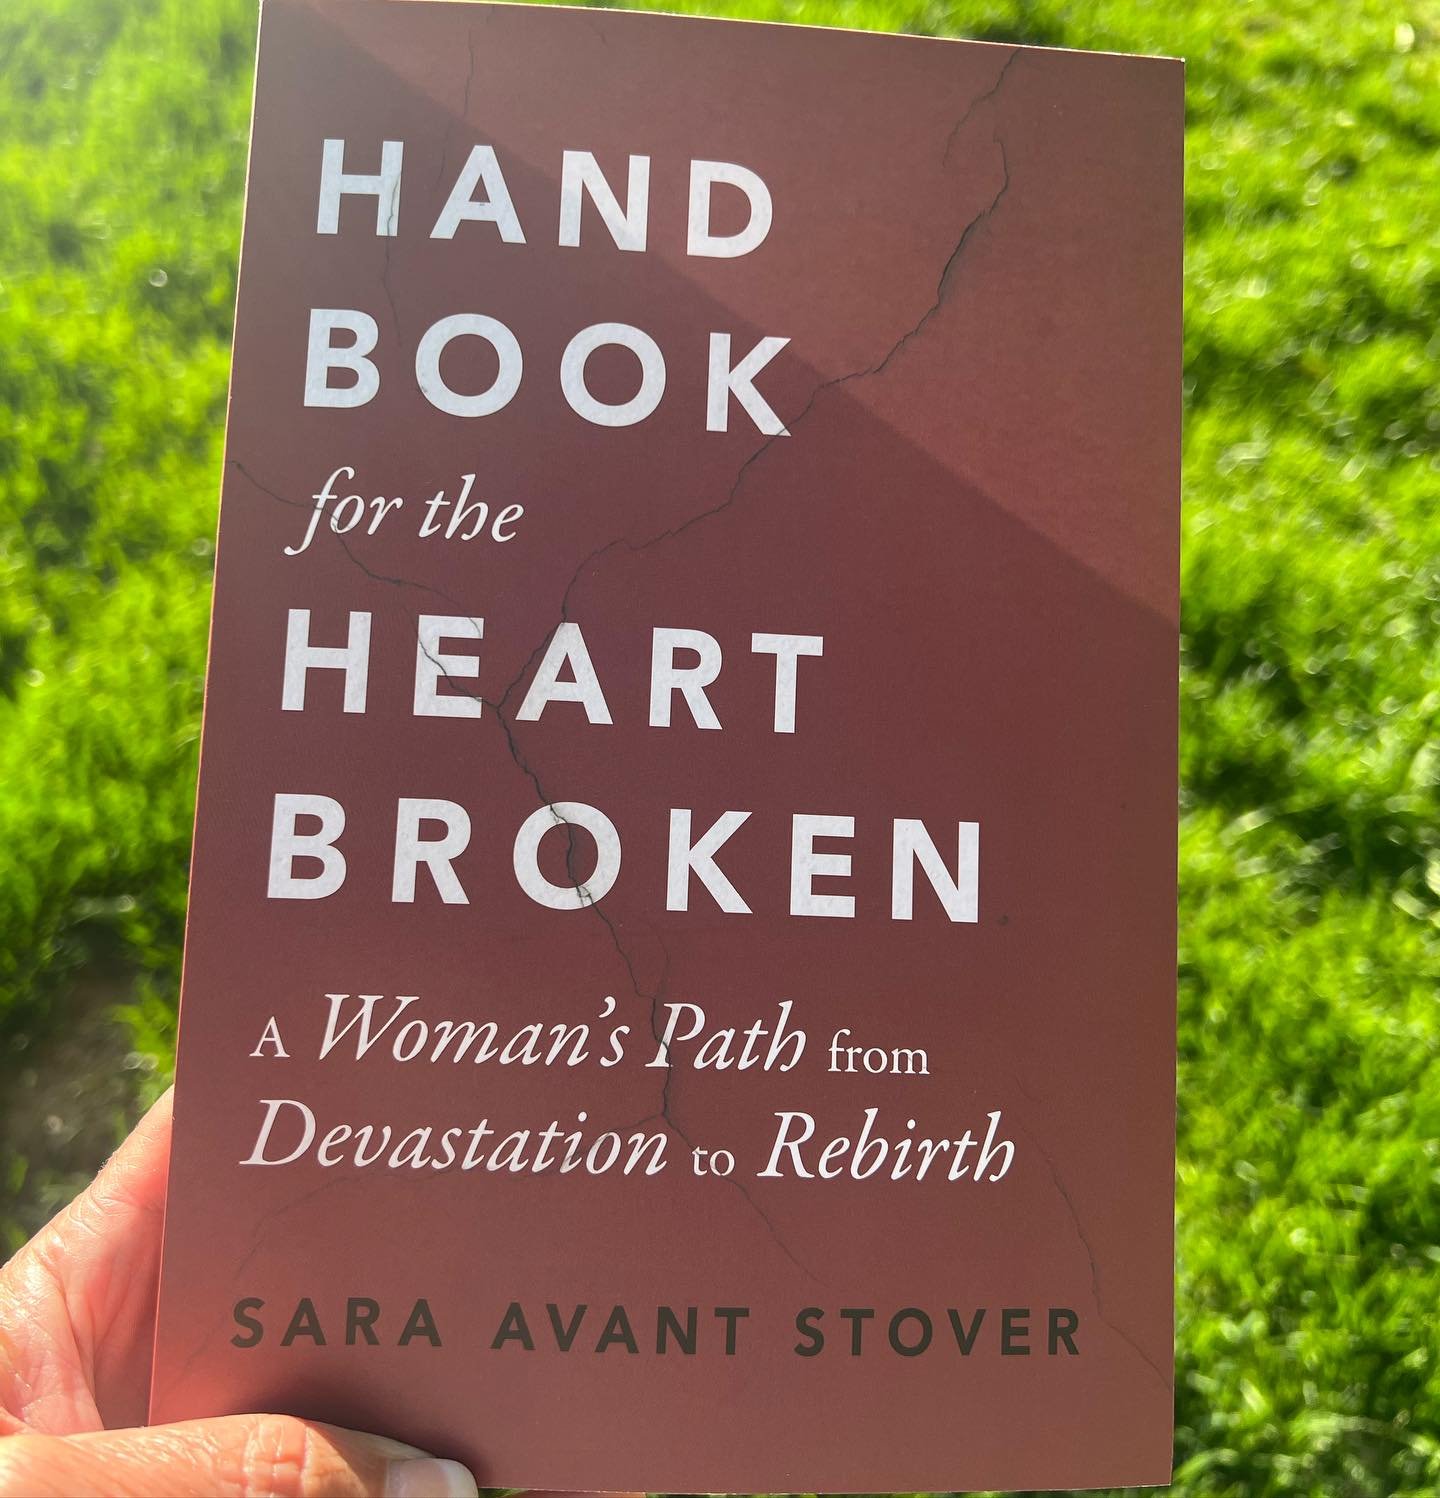 💫Happy news! My friend and colleague, @saraavantstover&rsquo;s, new book is here! 

&ldquo;Handbook for the Heartbroken&rdquo; is an intimate companion for women&rsquo;s most challenging seasons. It expands the heartbreak conversation beyond just br